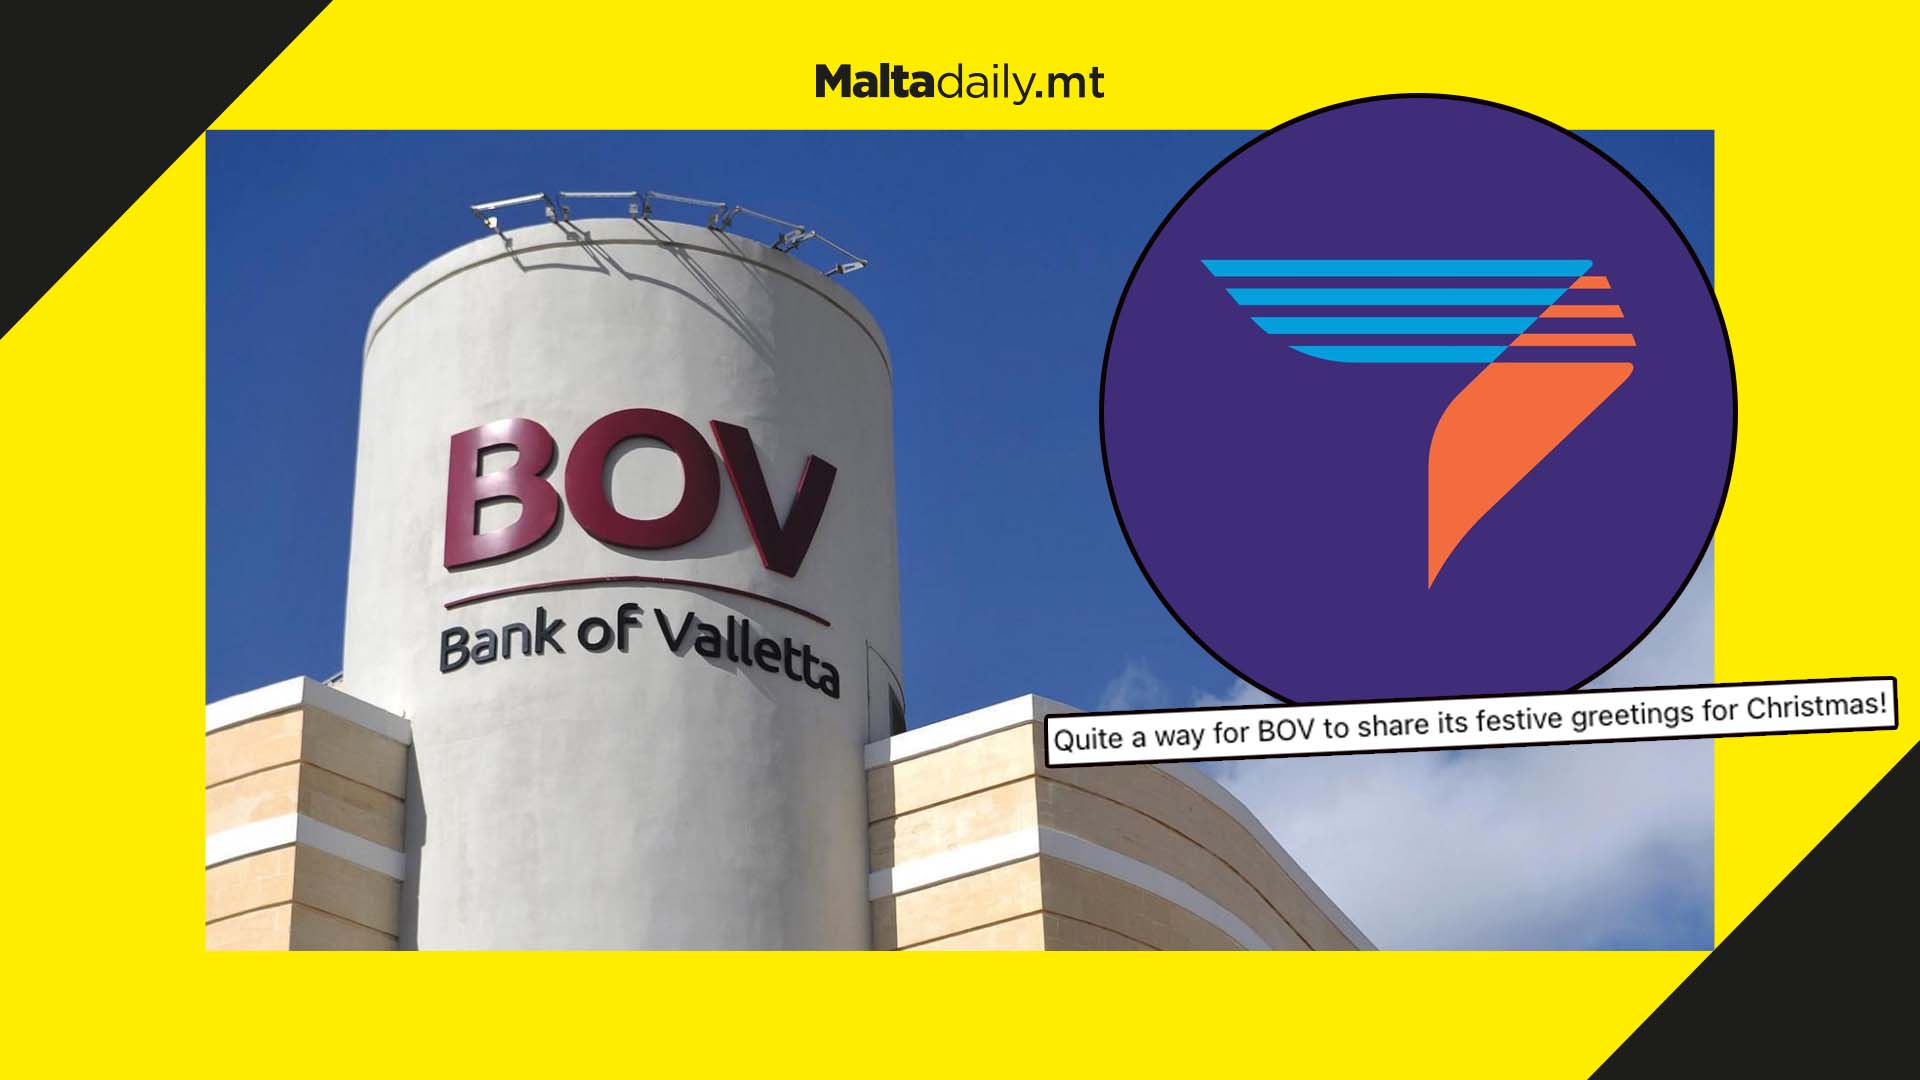 Outrage as BOV triples monthly admin fee to €30